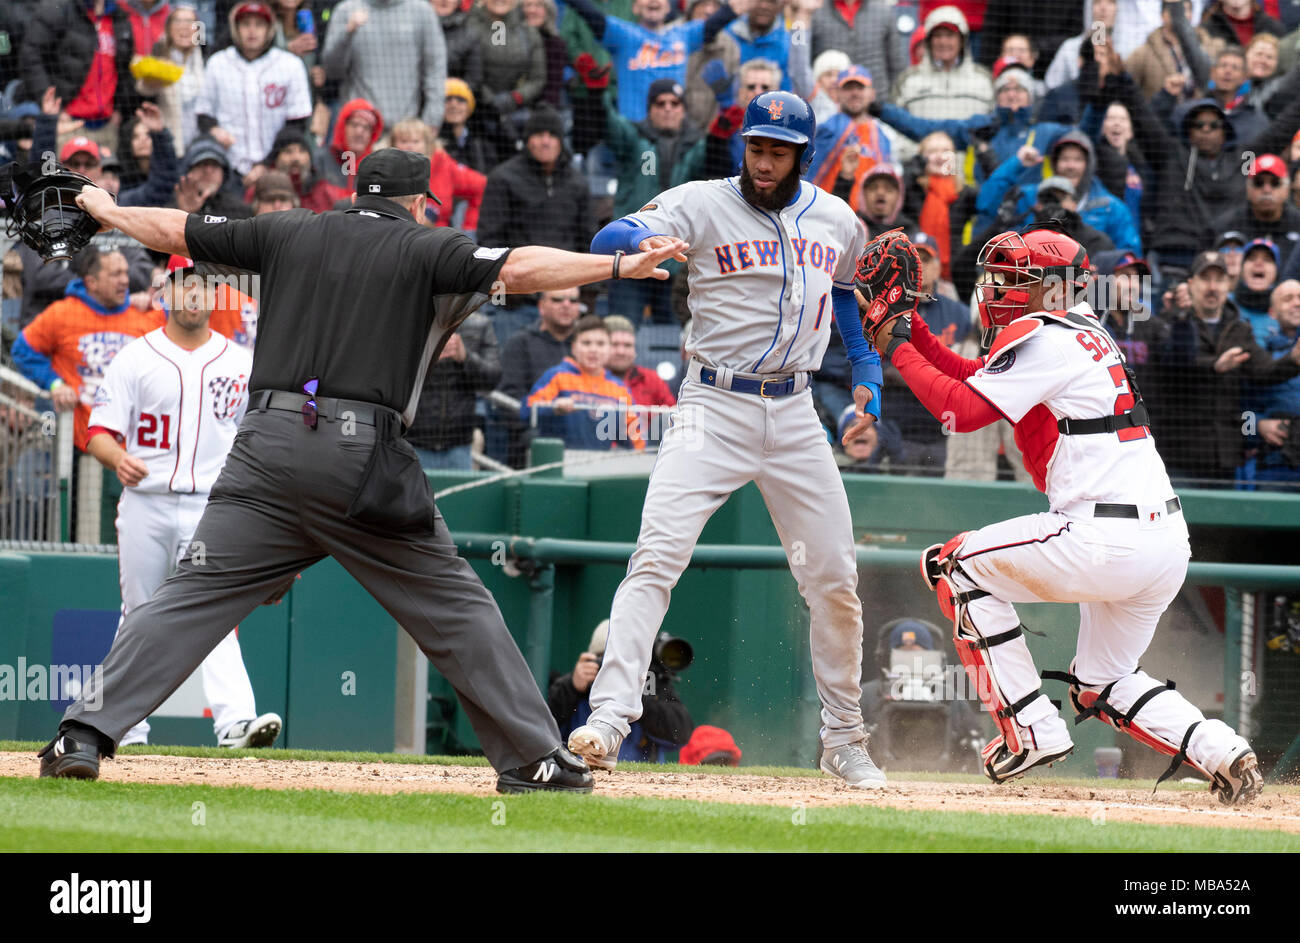 The Play. 7th Apr, 2018. Home plate umpire Marty Foster (60), left calls New York Mets shortstop Amed Rosario (1), center, safe after he scored on an Asdrubal Cabrera double in the seventh inning against the Washington Nationals at Nationals Park in Washington, DC on Saturday April 7, 2018. Washington Nationals catcher Pedro Severino (29), right, defends on the play. The Mets won the game 3-2. Credit: Ron Sachs/CNP (RESTRICTION: NO New York or New Jersey Newspapers or newspapers within a 75 mile radius of New York City) · NO WIRE SERVICE · Credit: dpa/Alamy Live News Stock Photo